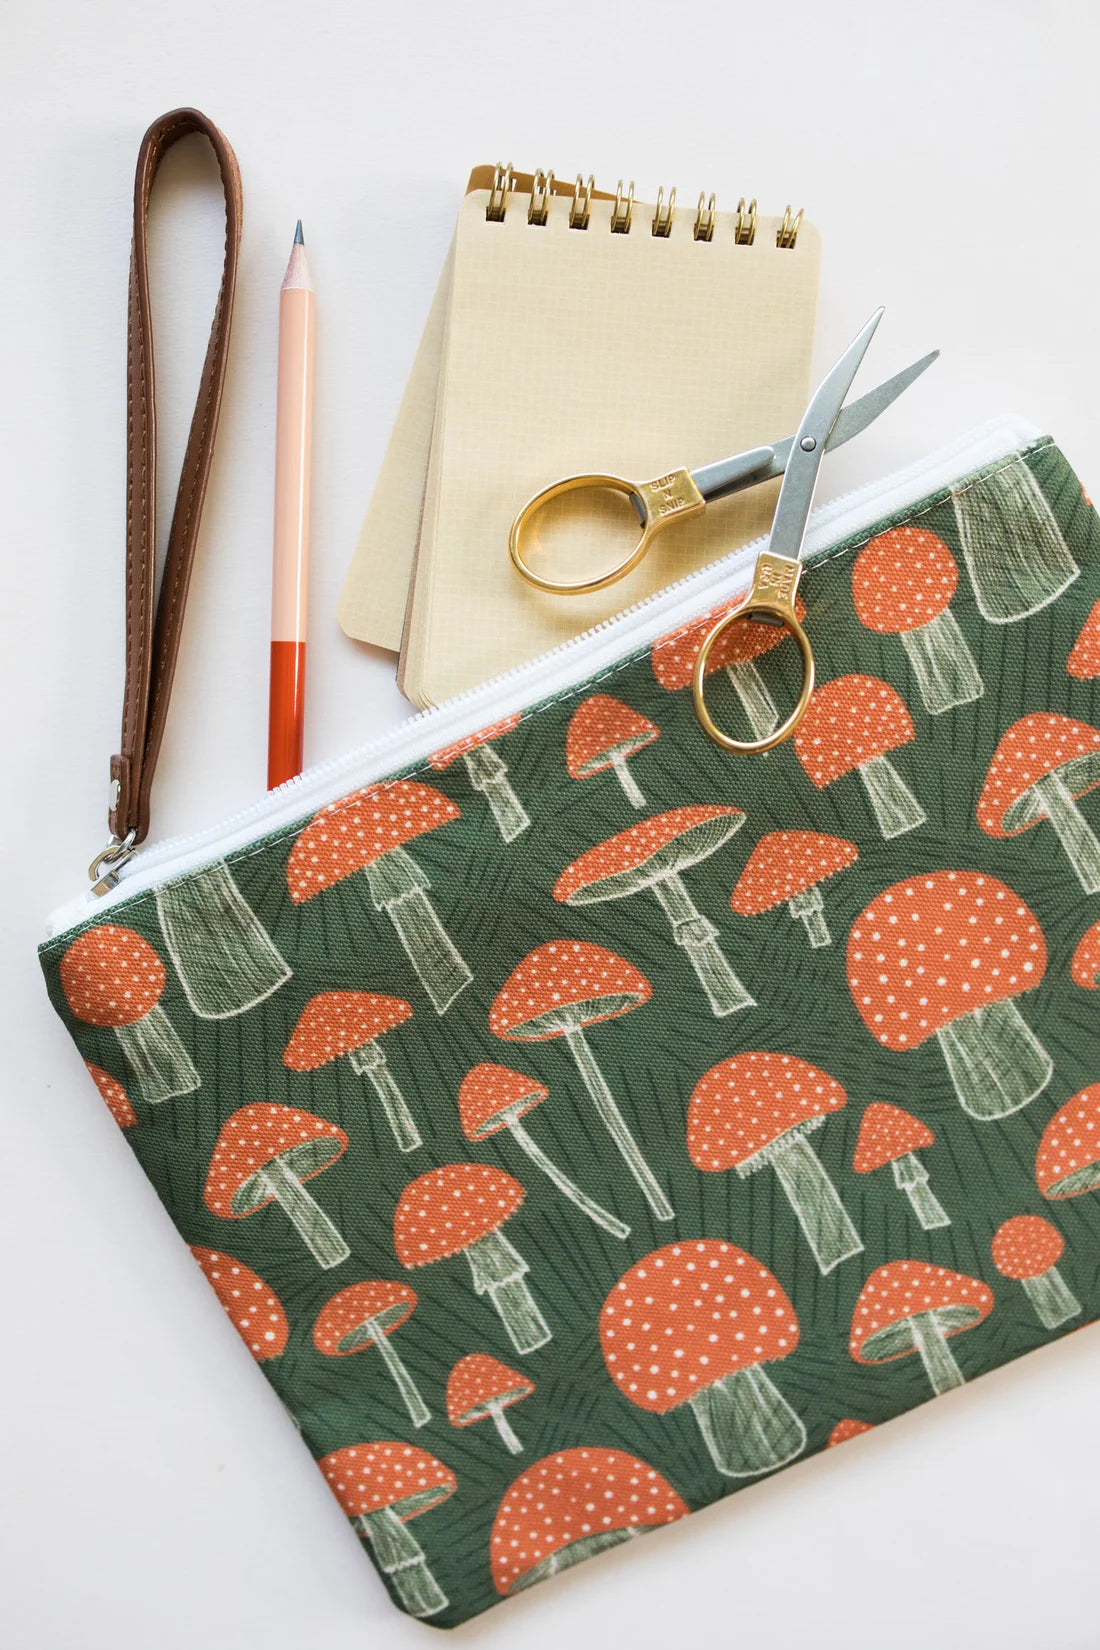 Wristlet zippered pouch designed with mushrooms on it 